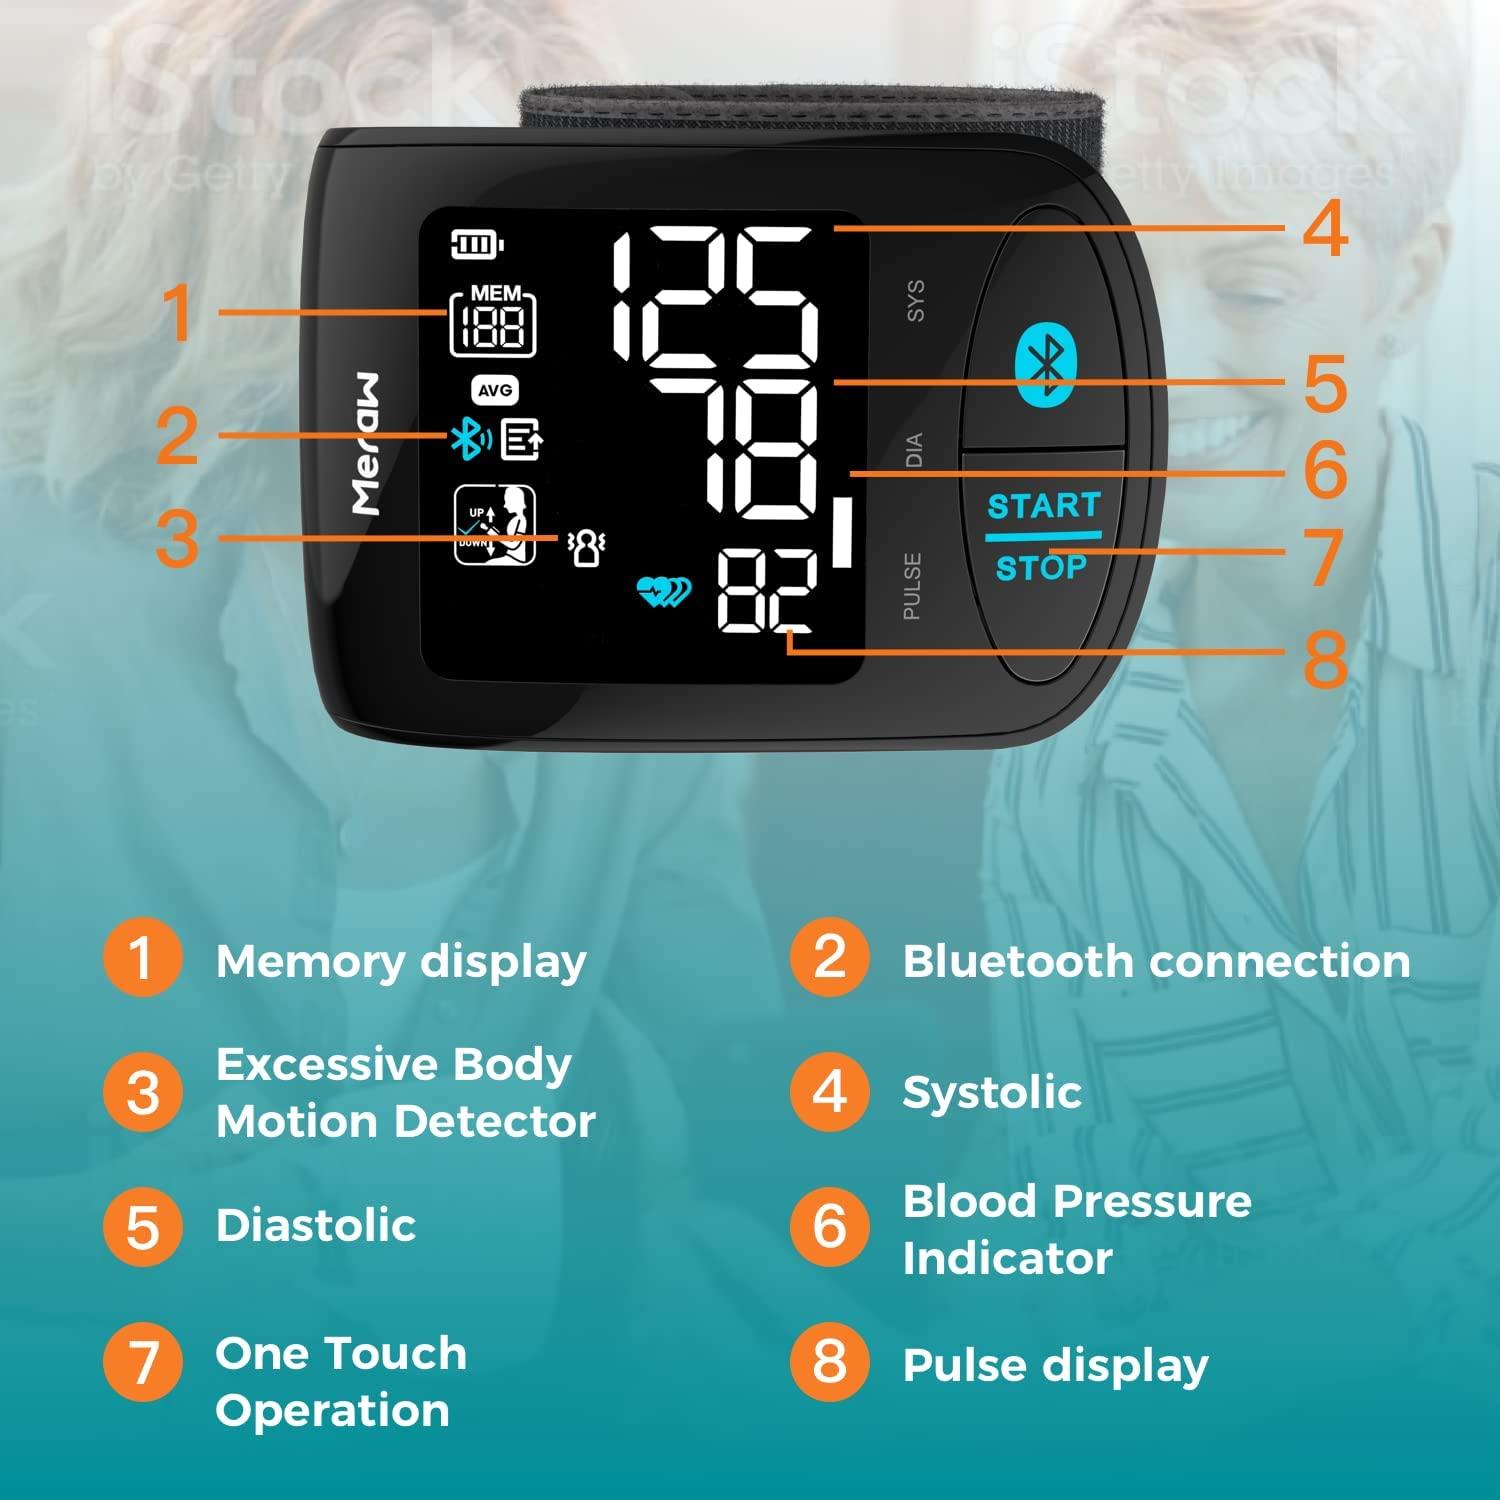 Meraw Bluetooth Blood Pressure Machine, High Accuracy Blood Pressure Cuff  Arm 8.7-16.5' with Irregular Heartbeat Monitoring, Unlimited Memories in  APP, 4 AAA Batteries